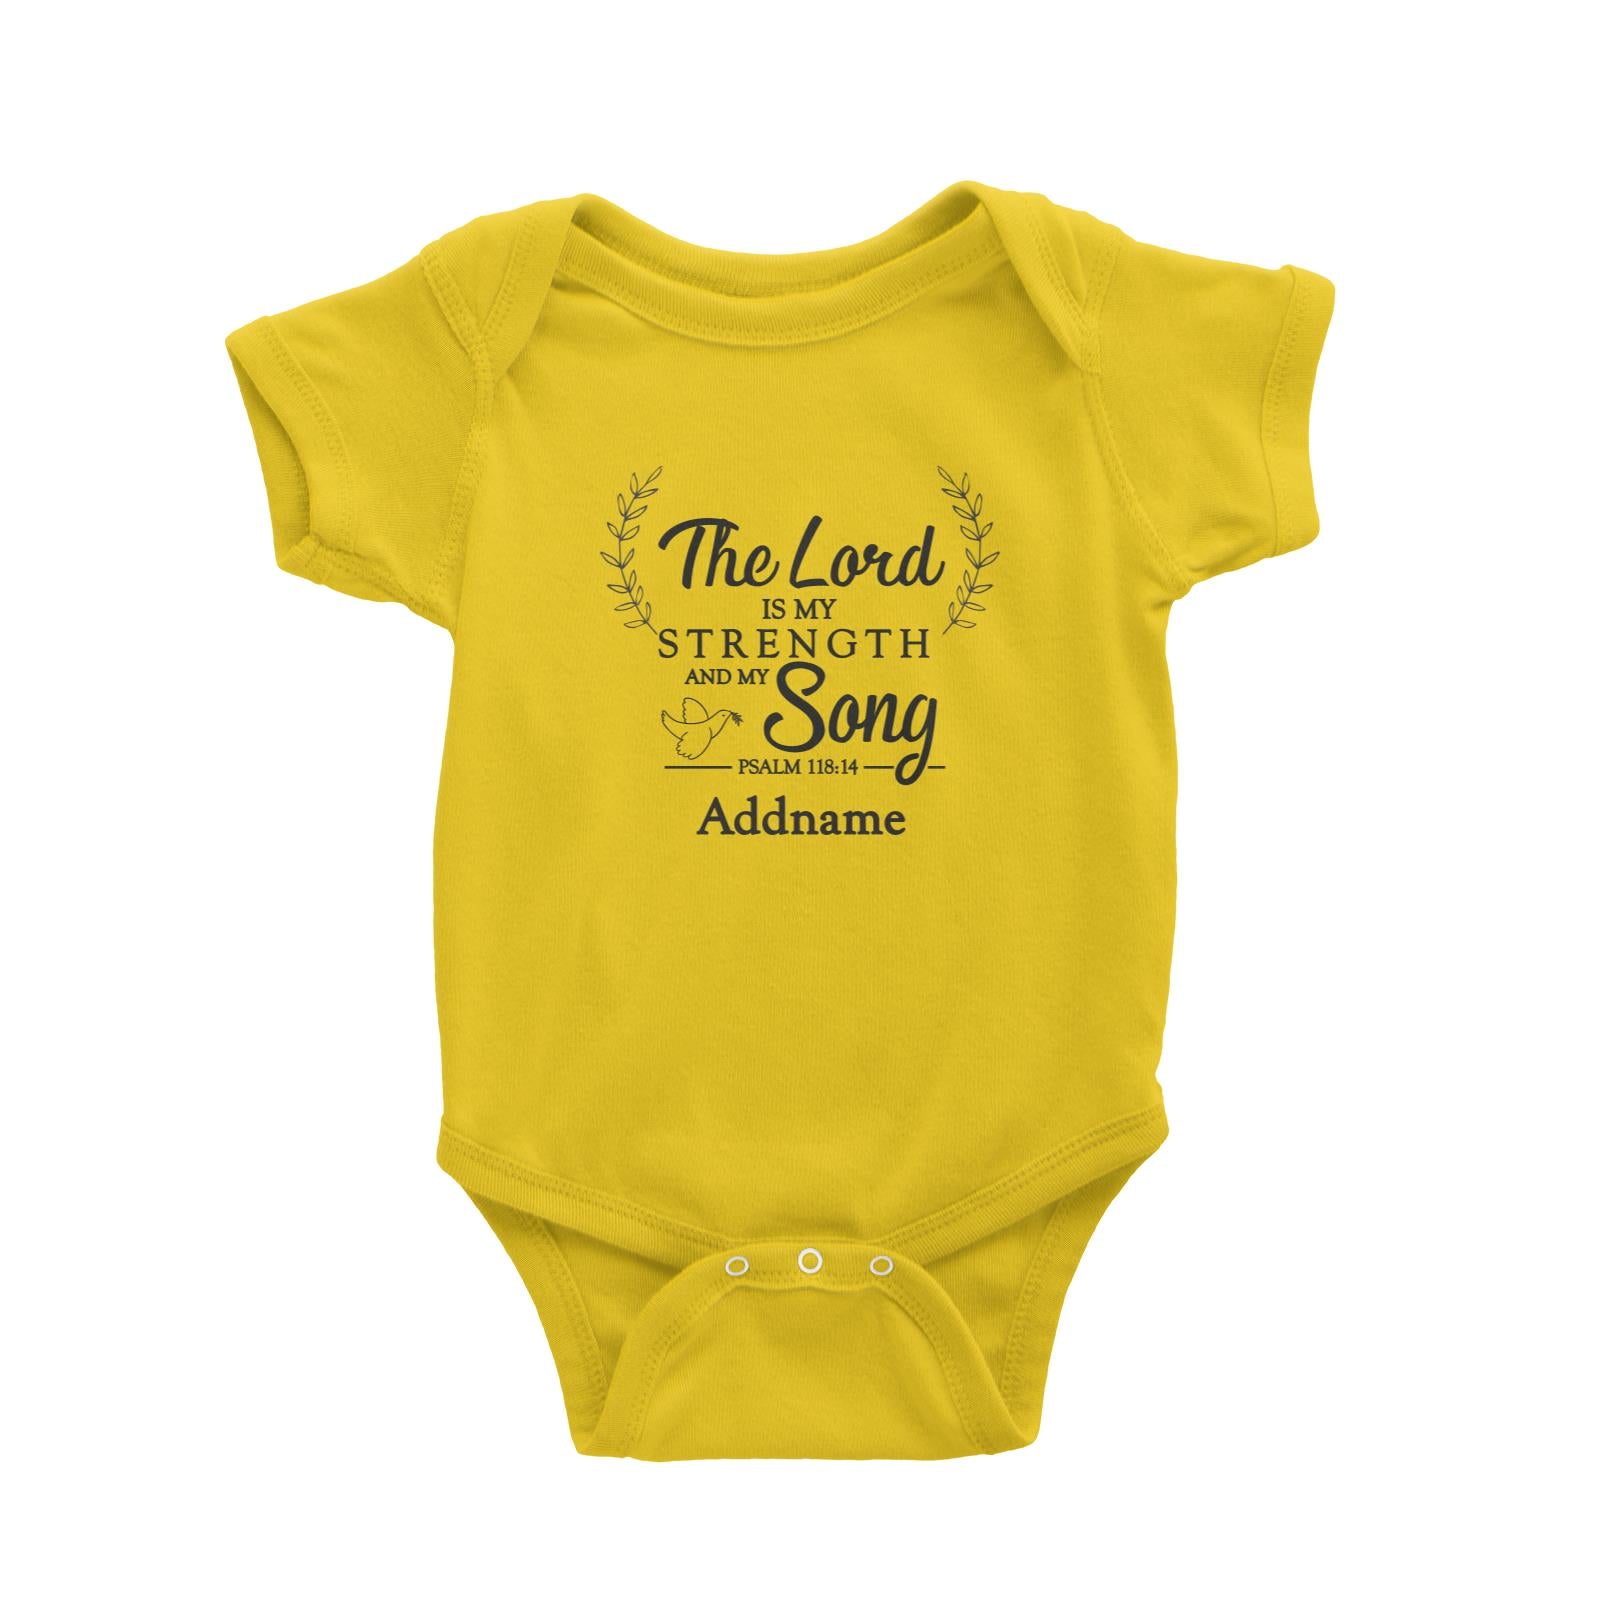 Christian Series The Lord Is My Strength Song Psalm 118.14 Addname Baby Romper